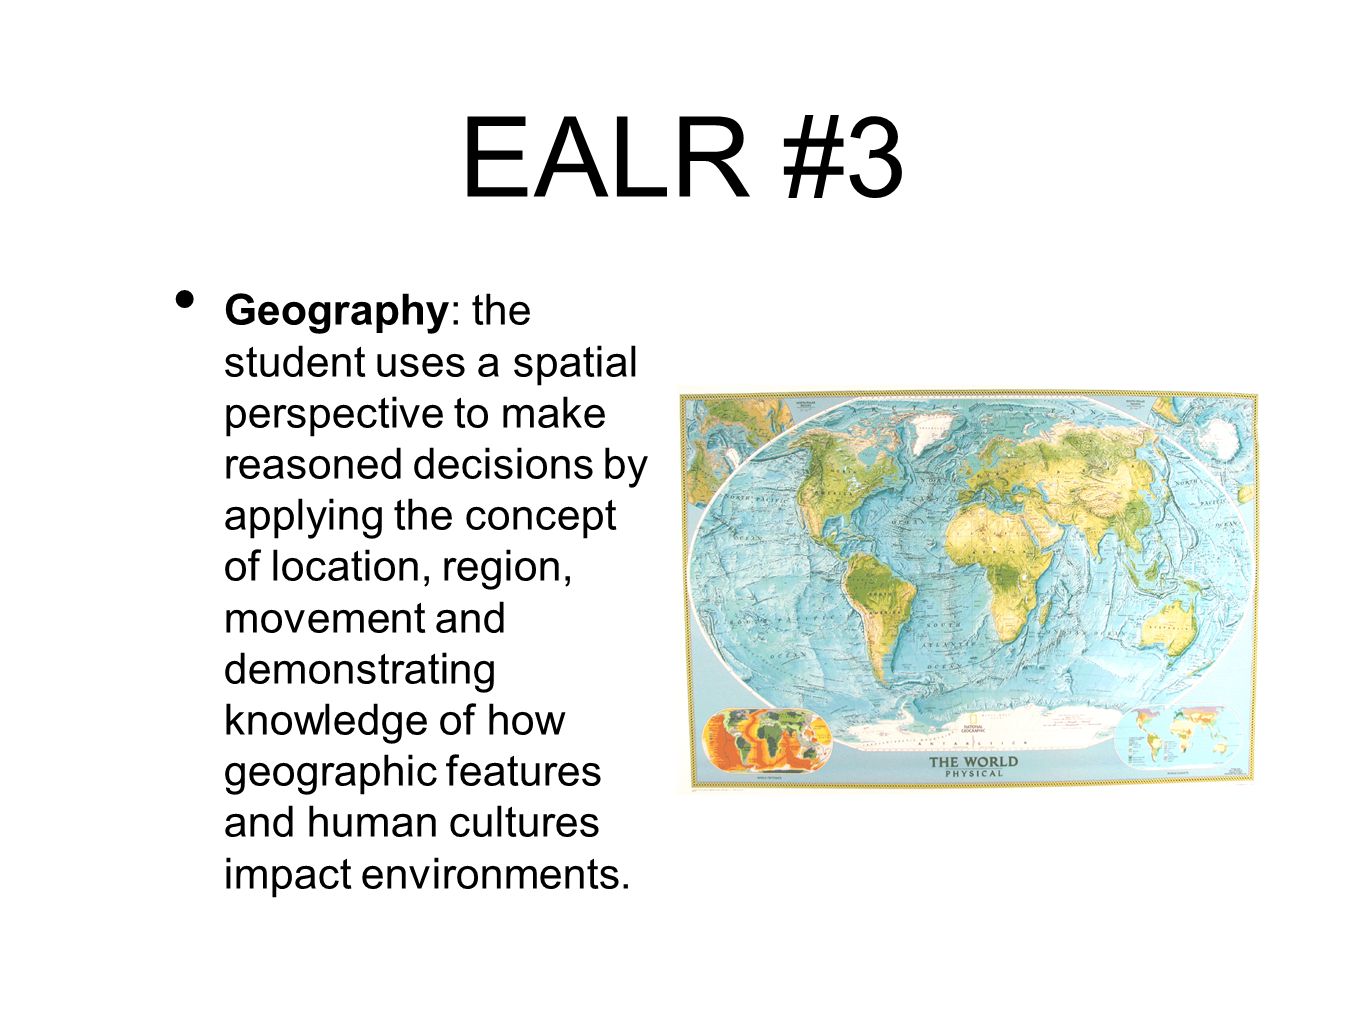 EALR #3 Geography: the student uses a spatial perspective to make reasoned decisions by applying the concept of location, region, movement and demonstrating knowledge of how geographic features and human cultures impact environments.